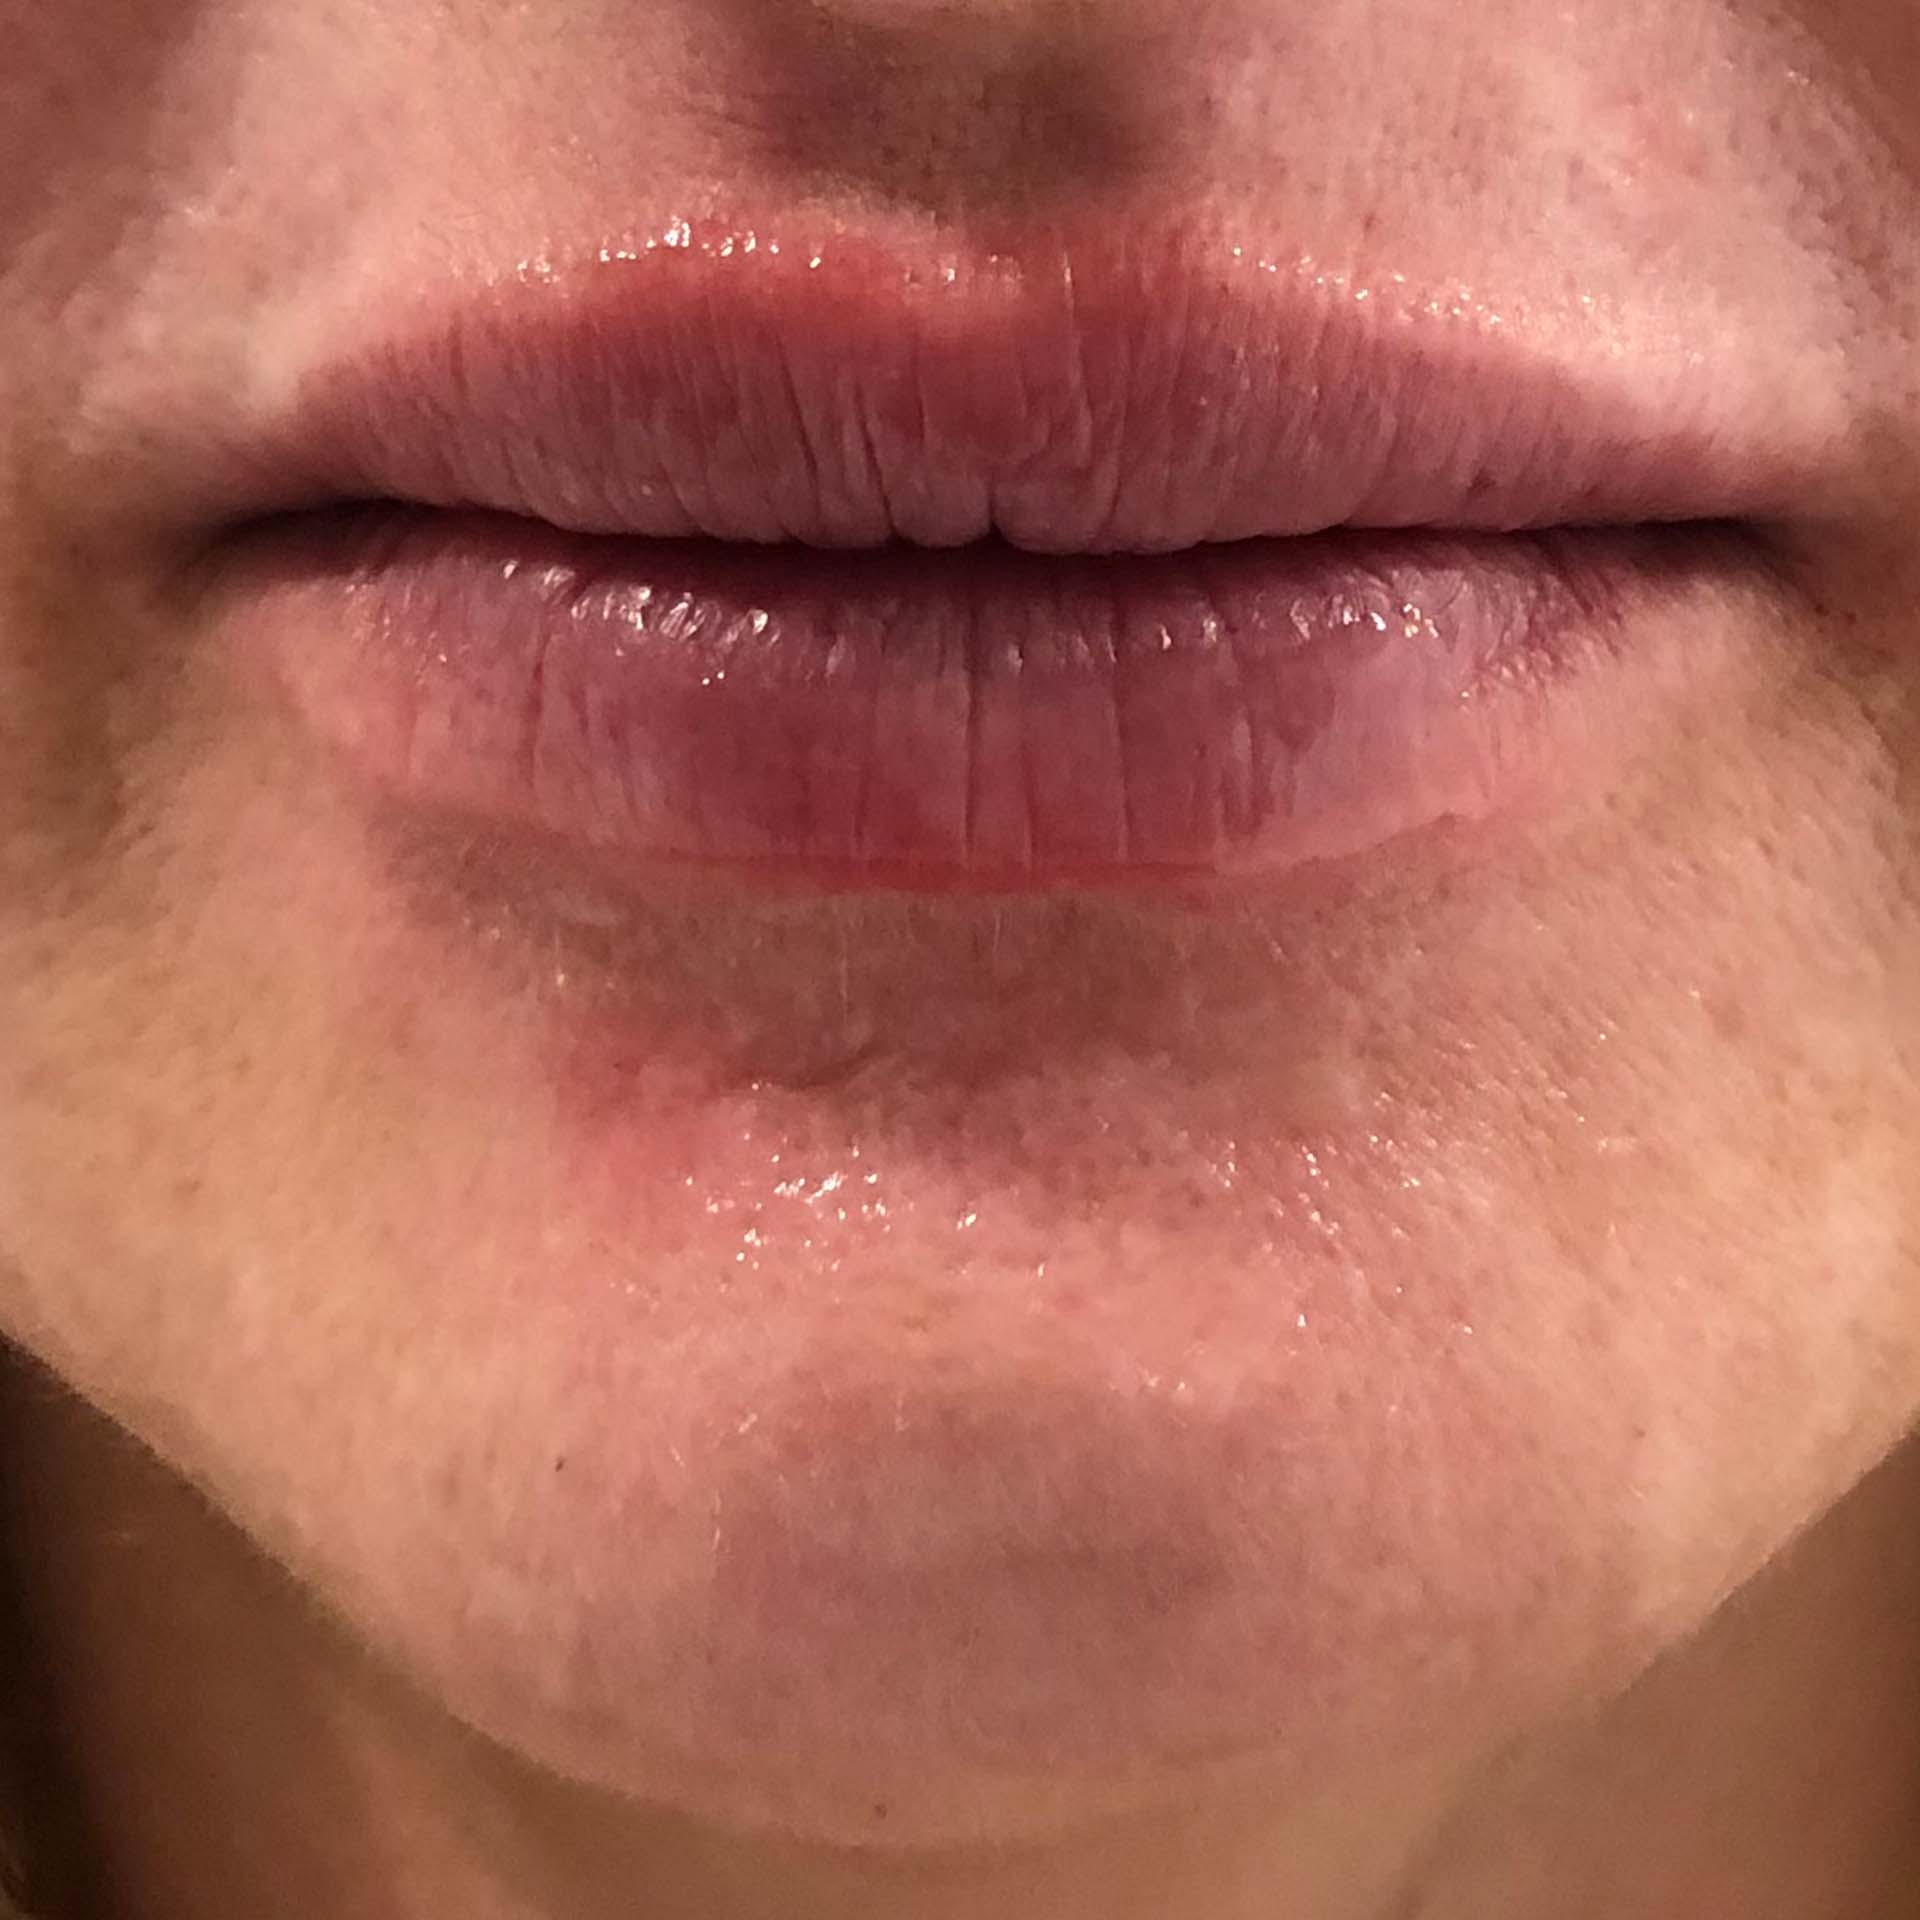 Lip line reshaping, laugh line correction